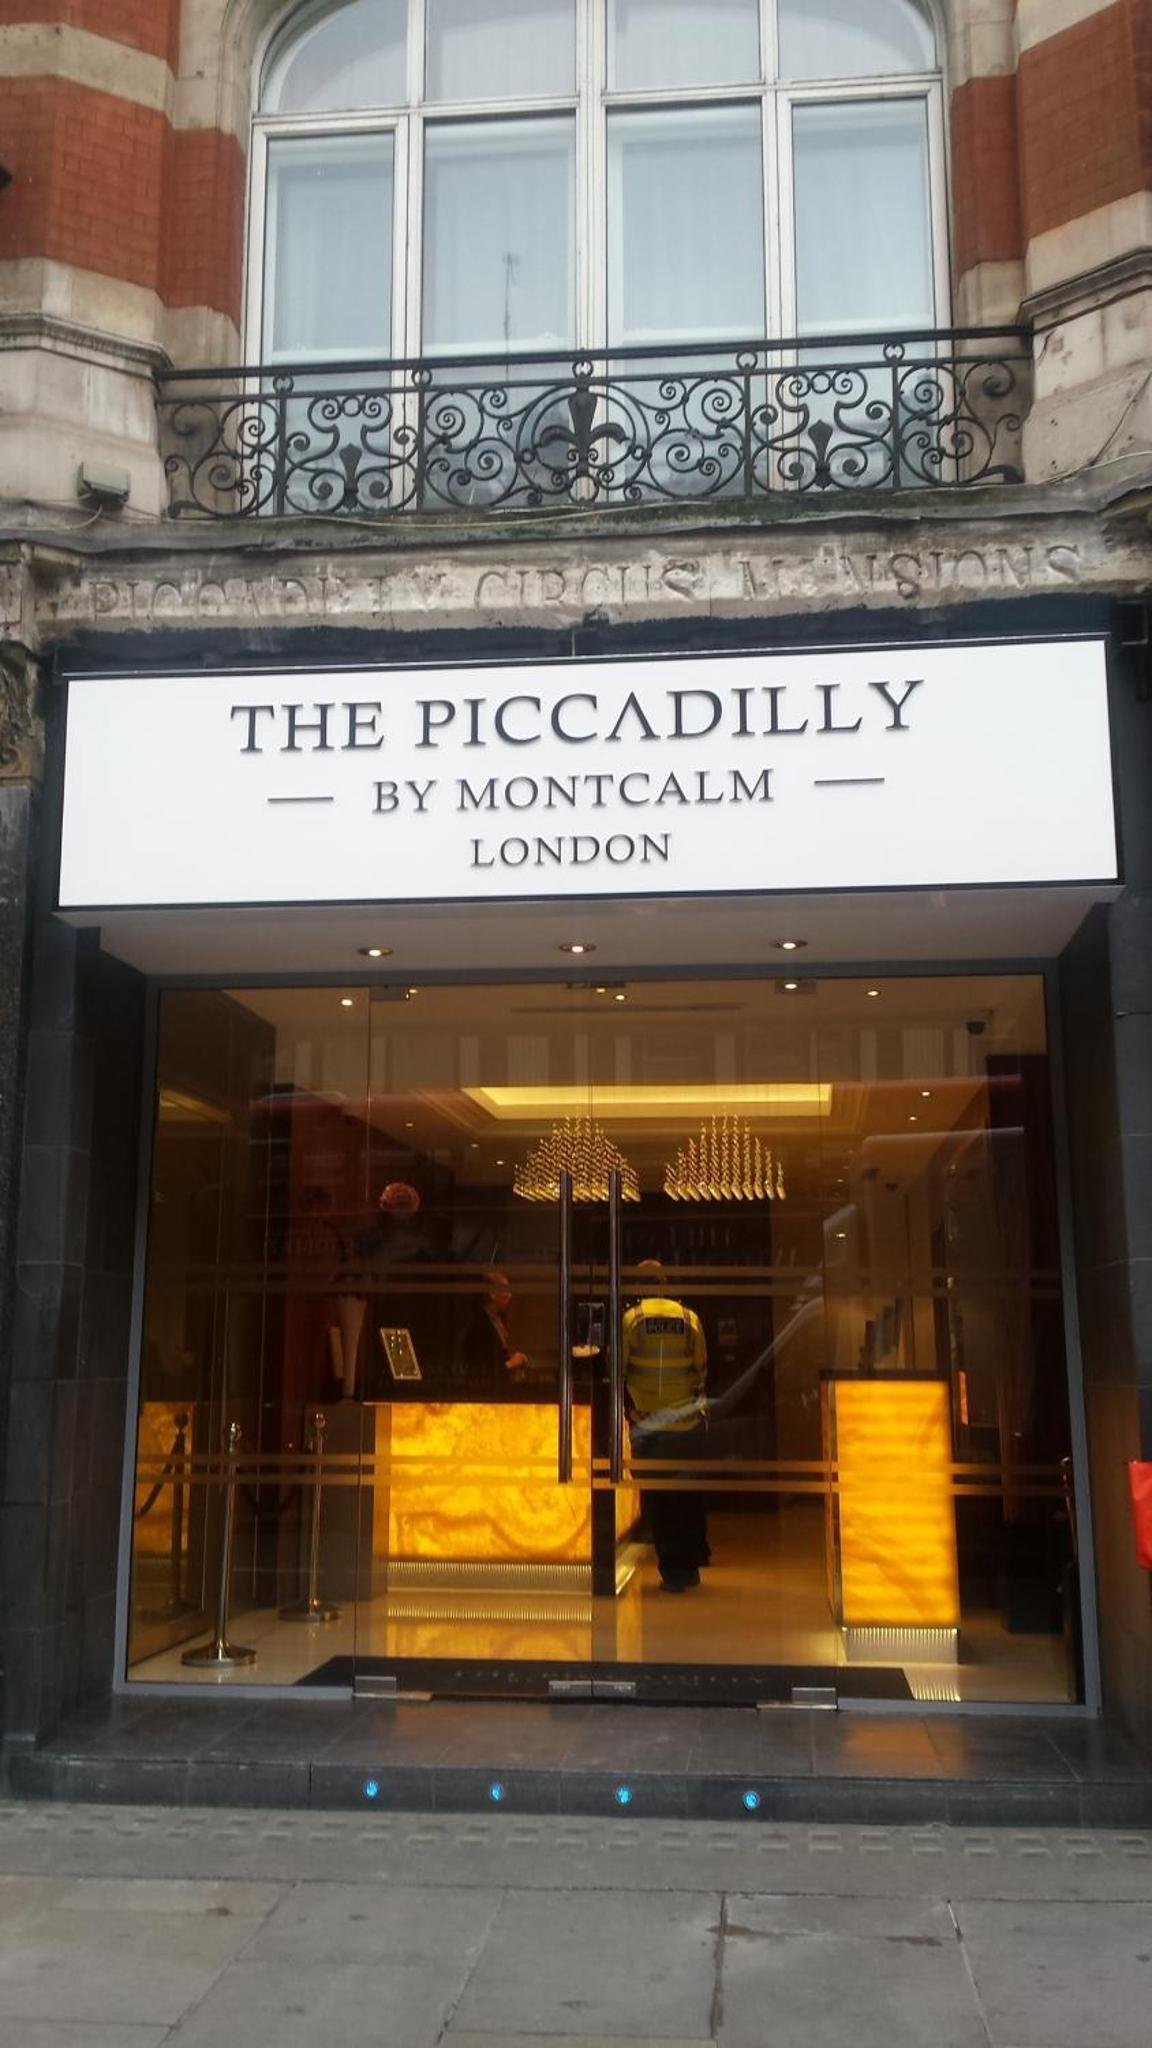 The Piccadilly London West End